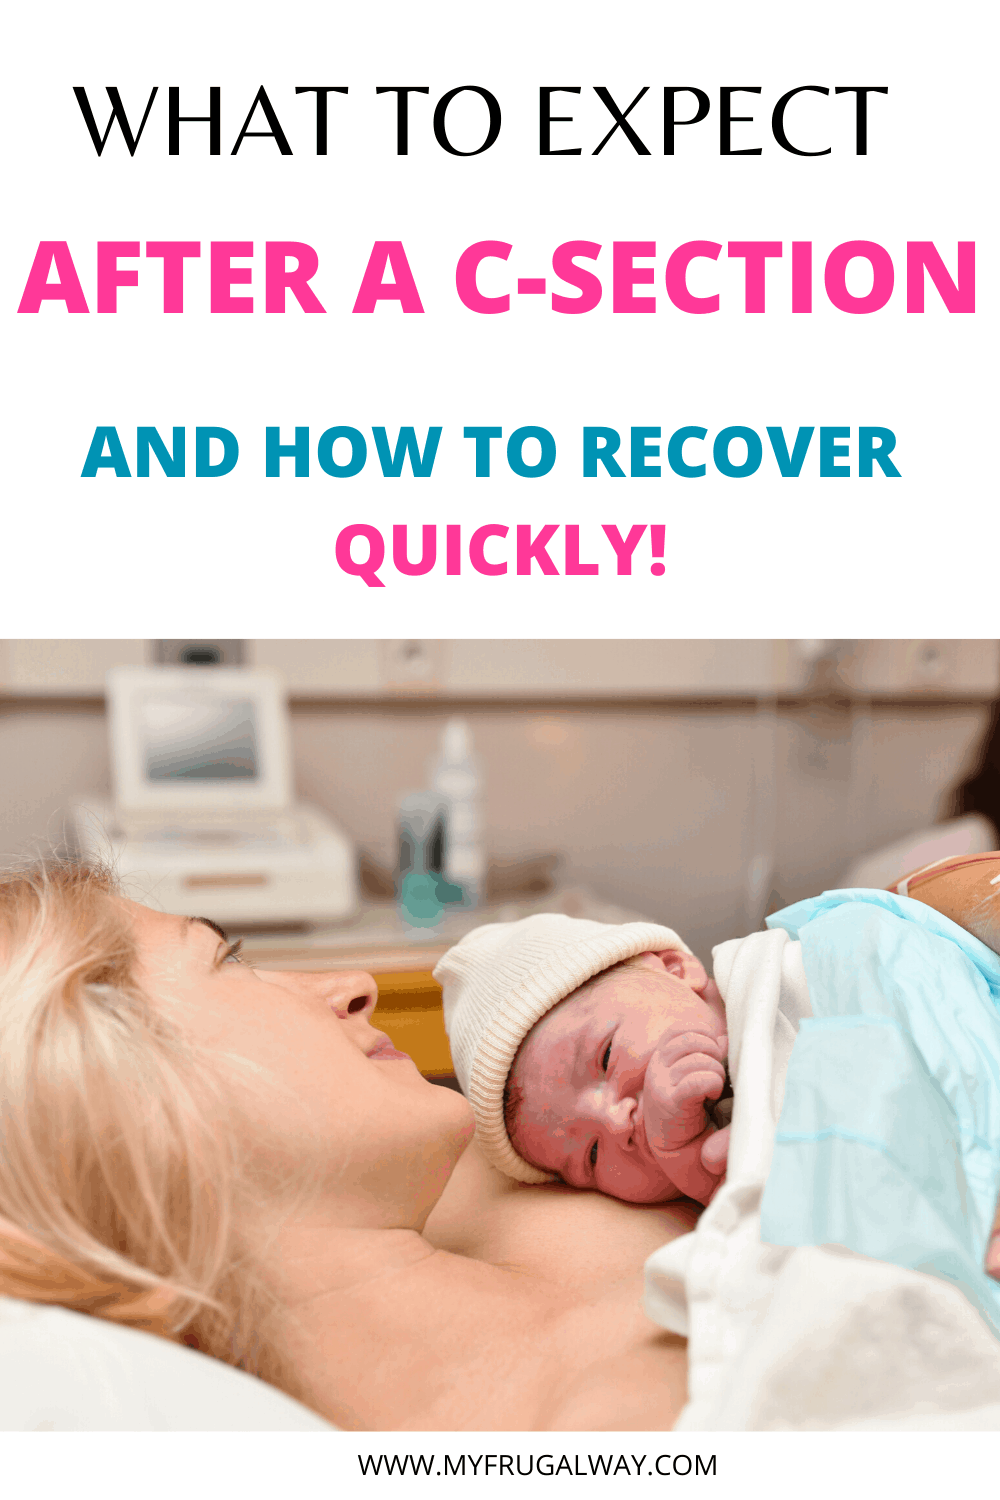 c section recovery tips I wish I knew before my scheduled c section surgery.